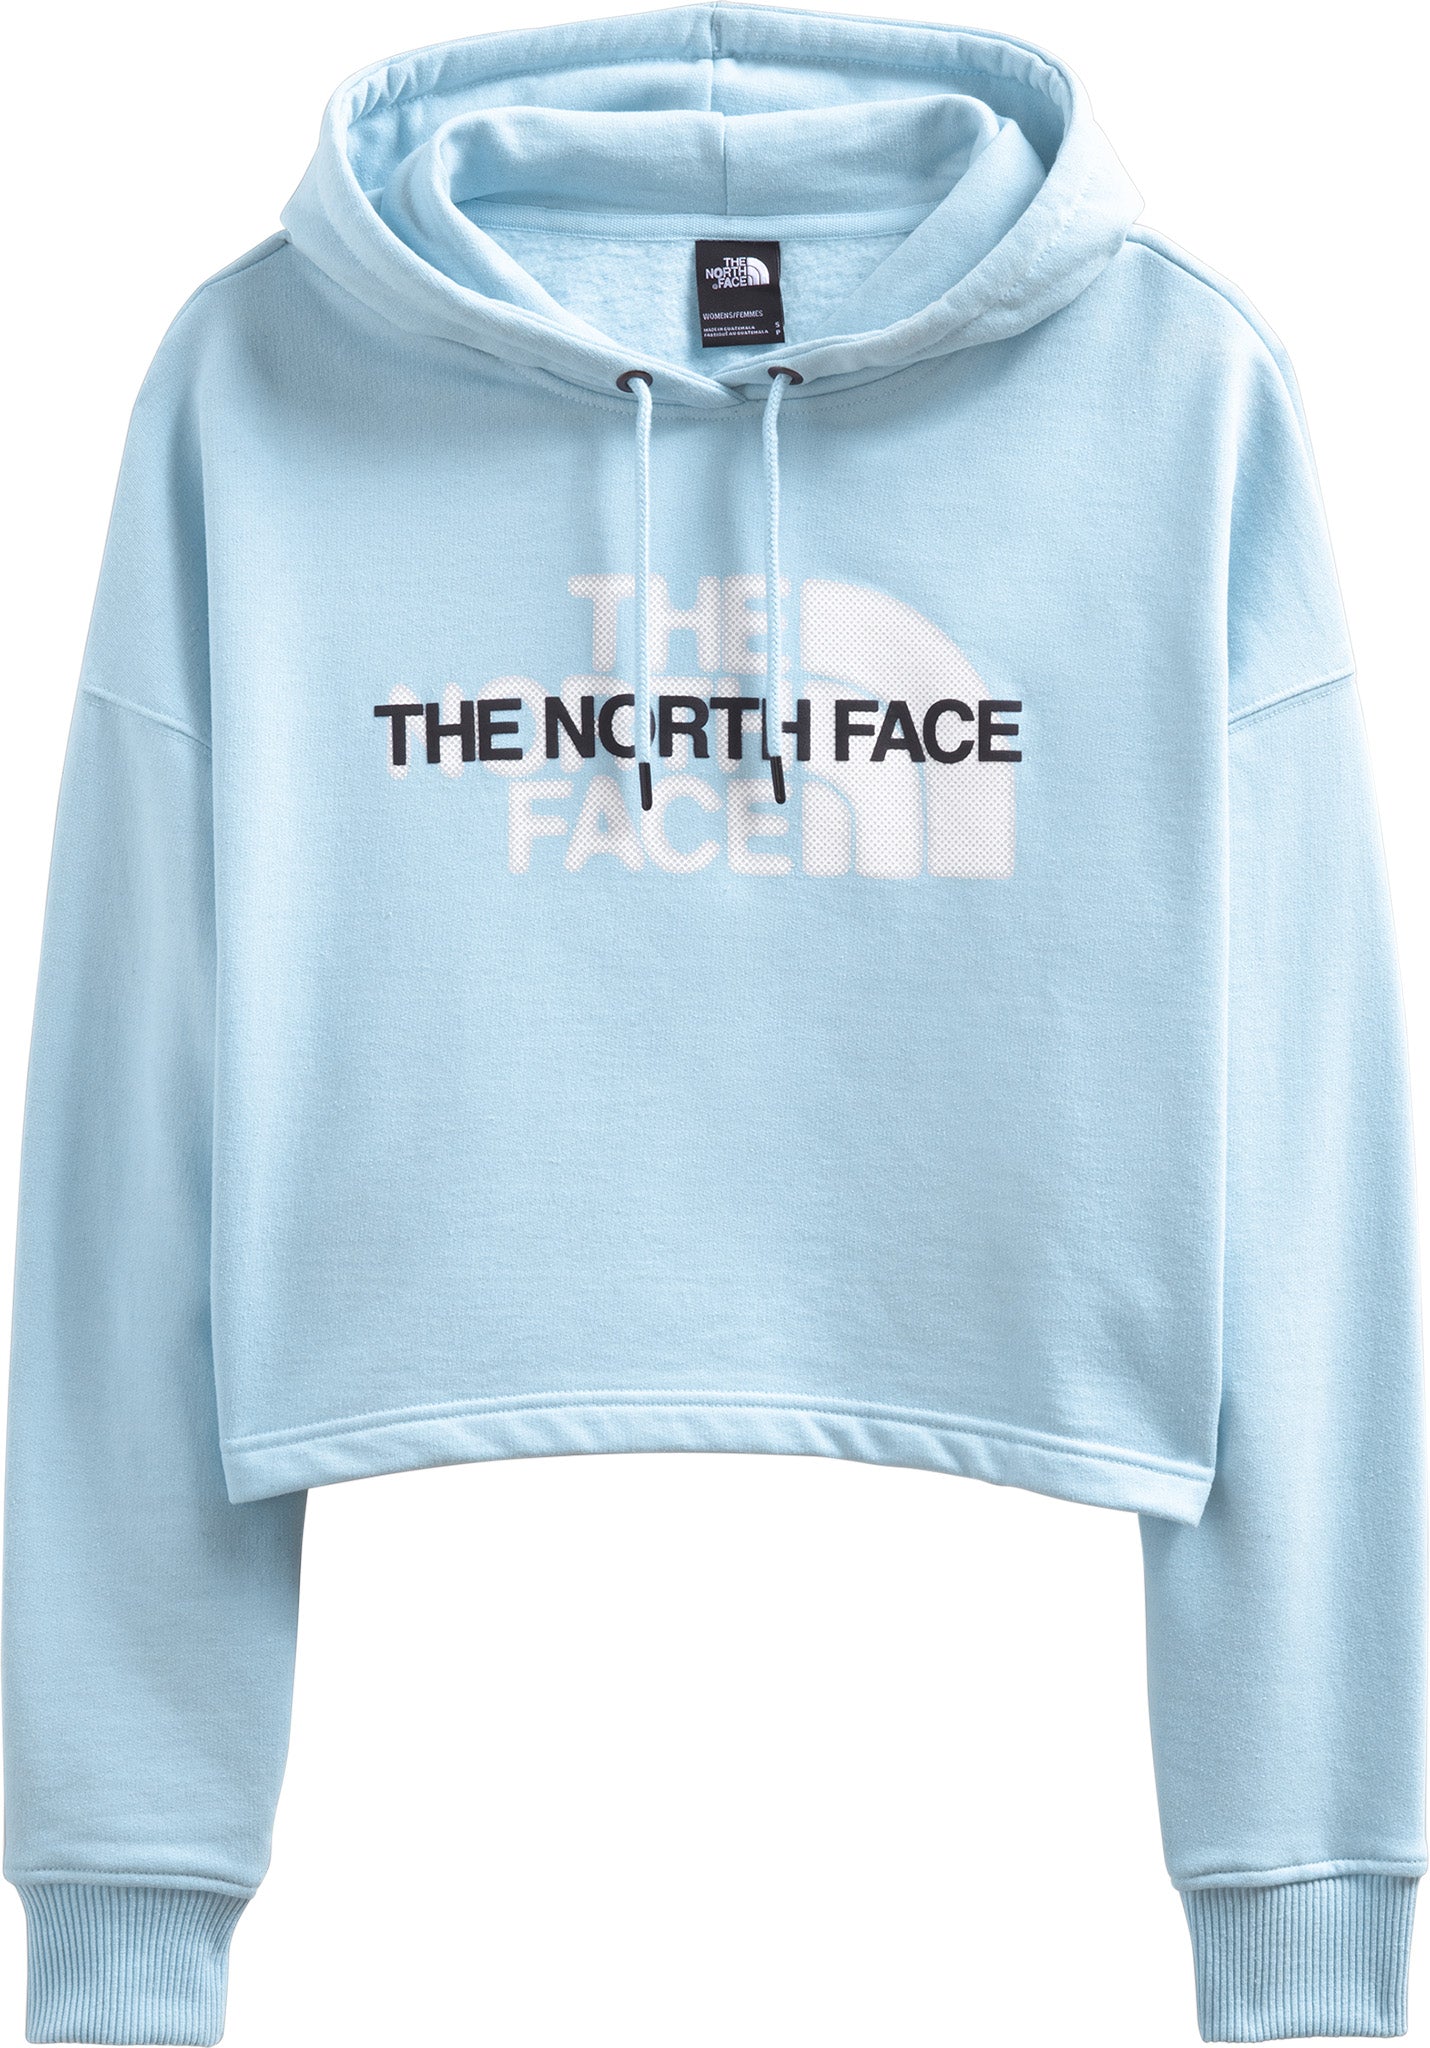 The North Face Coordinates Recycled Hoodie - Women’s | The Last Hunt